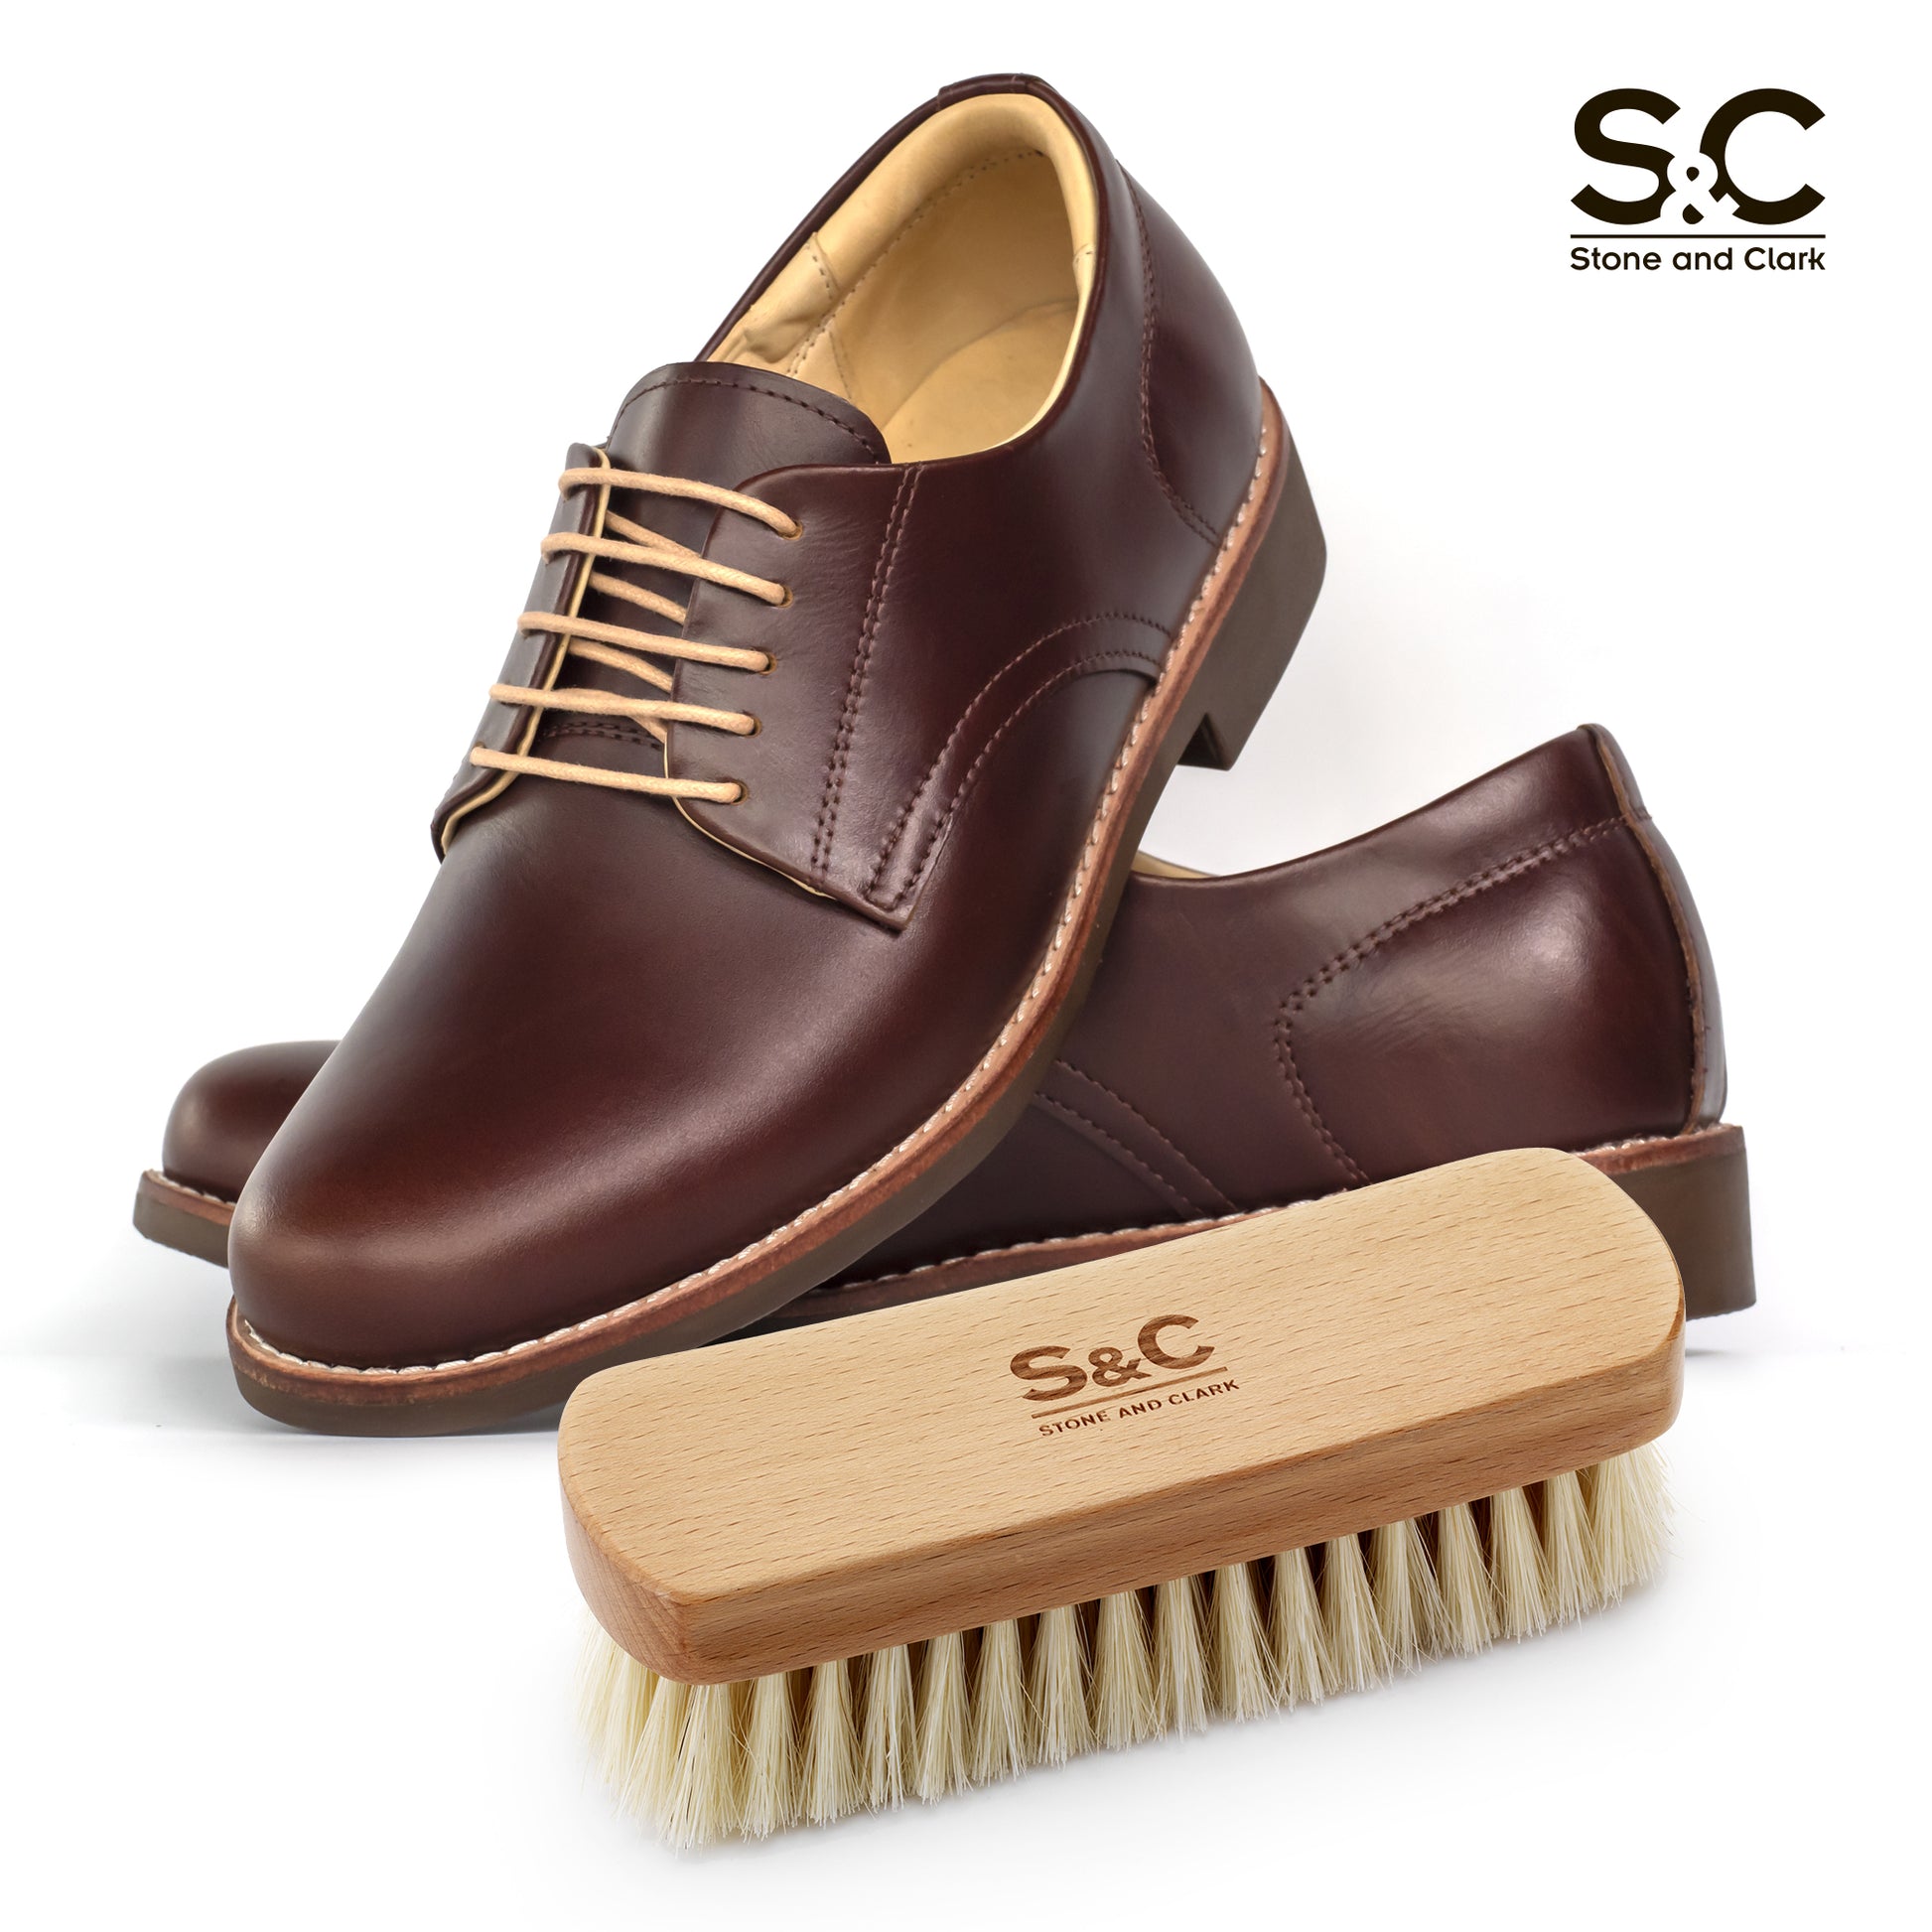 Stone and Clark Brown Horsehair Shoe Brush - Premium Leather Care